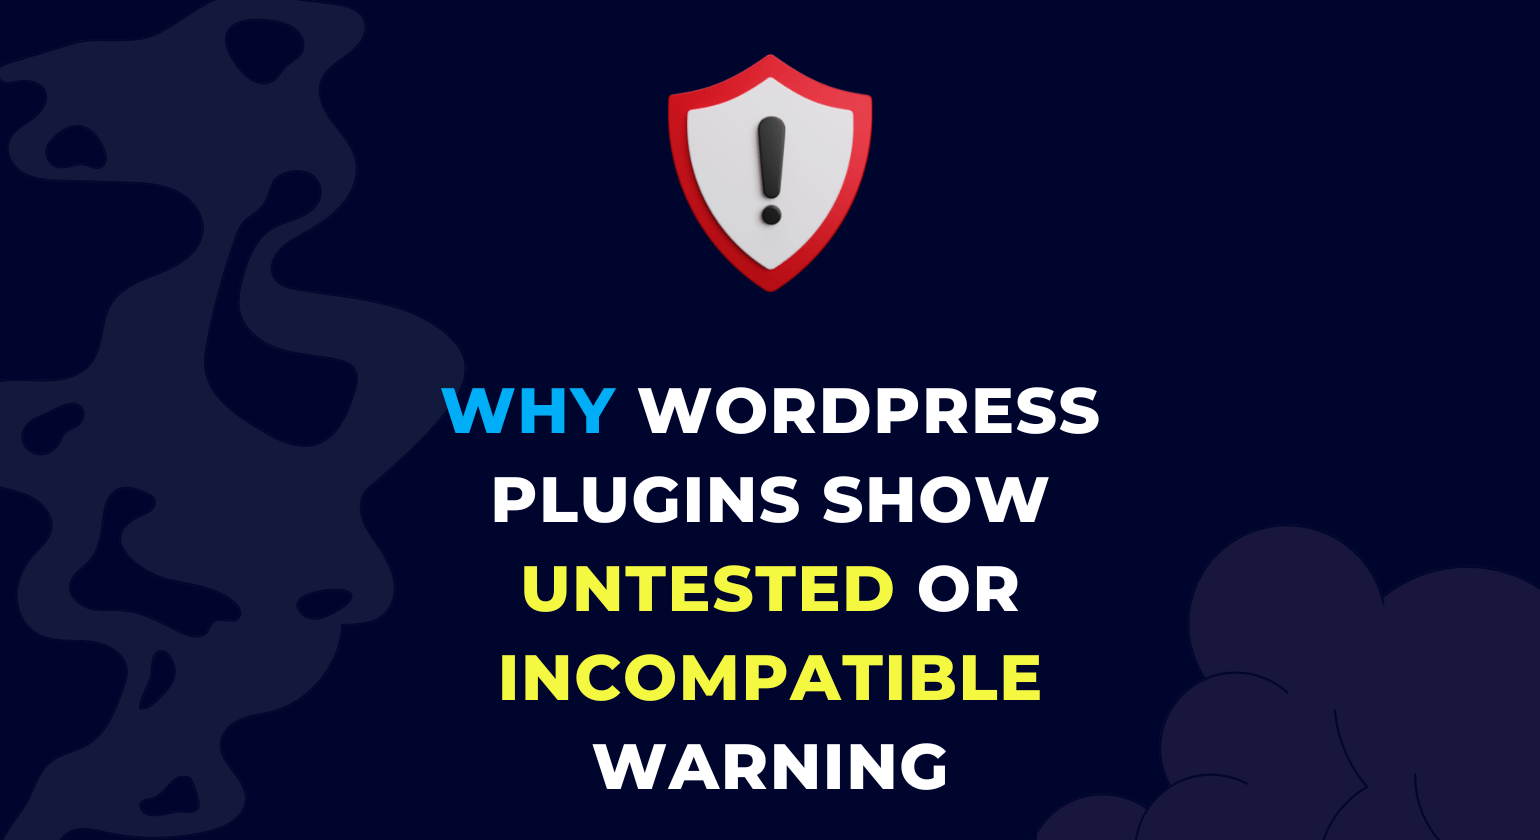 Why WordPress Plugins Show Untested or Incompatible Warning